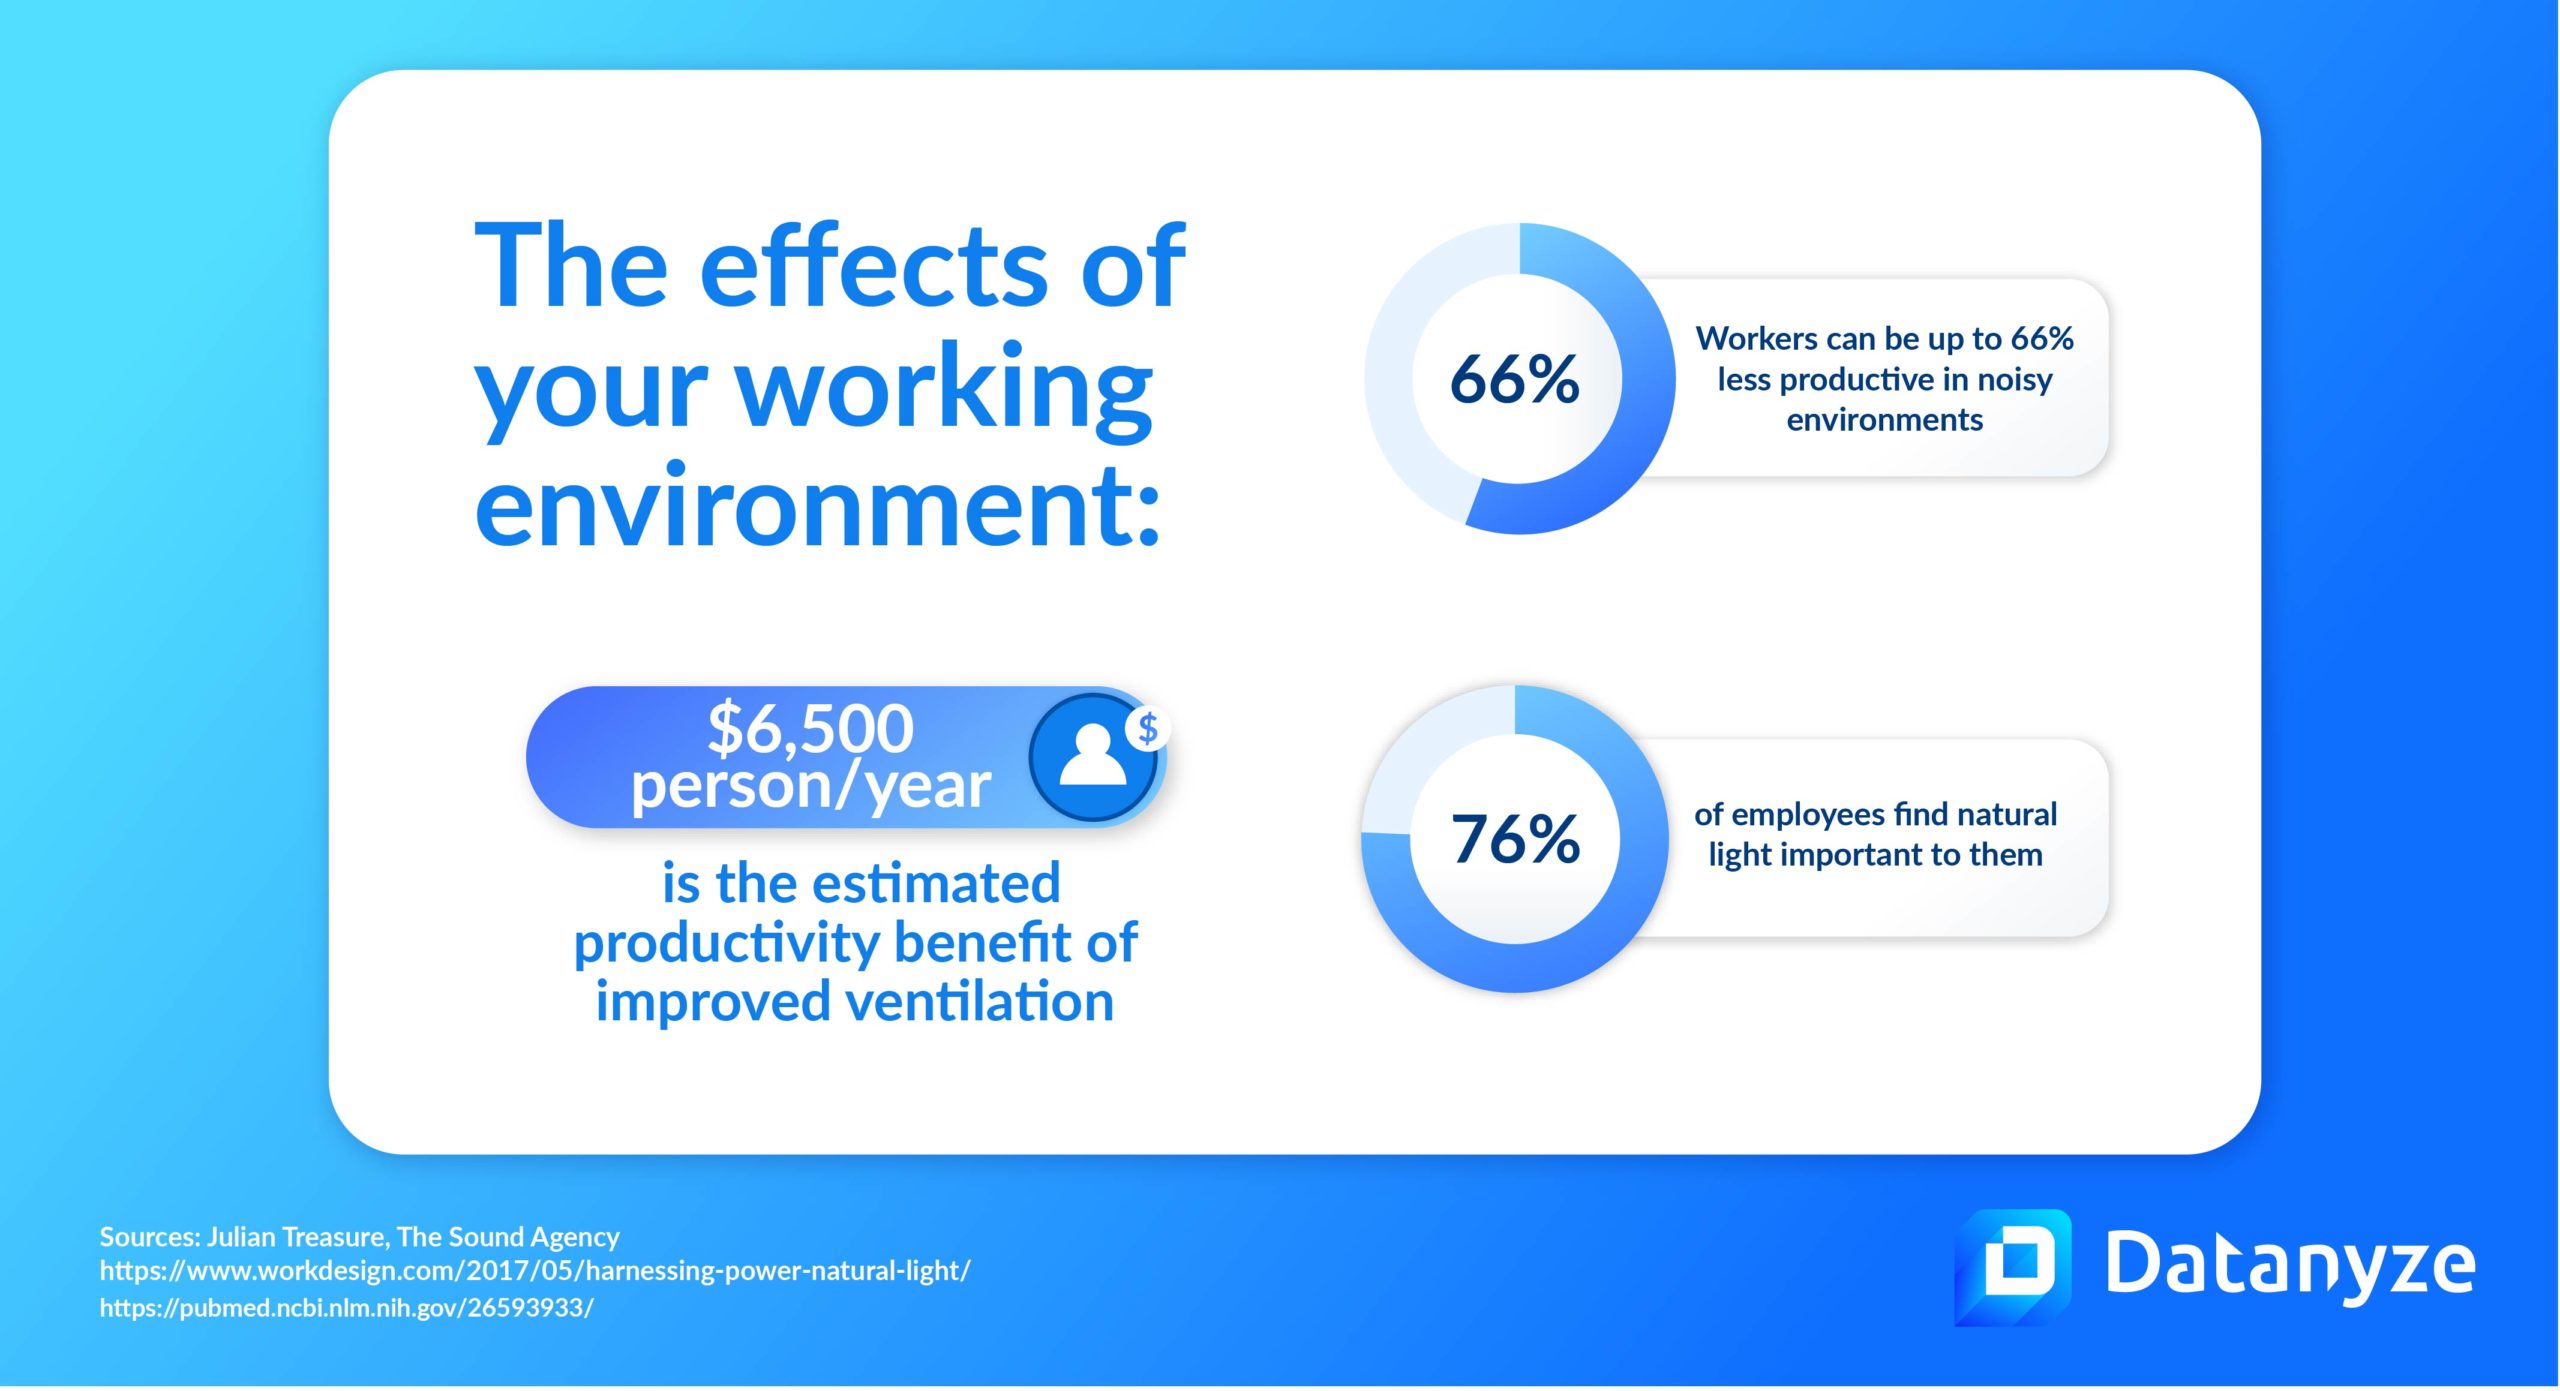 Key stats: $6,500 per person/year is the benefit of improved ventilation, while 75% of employees say light is important